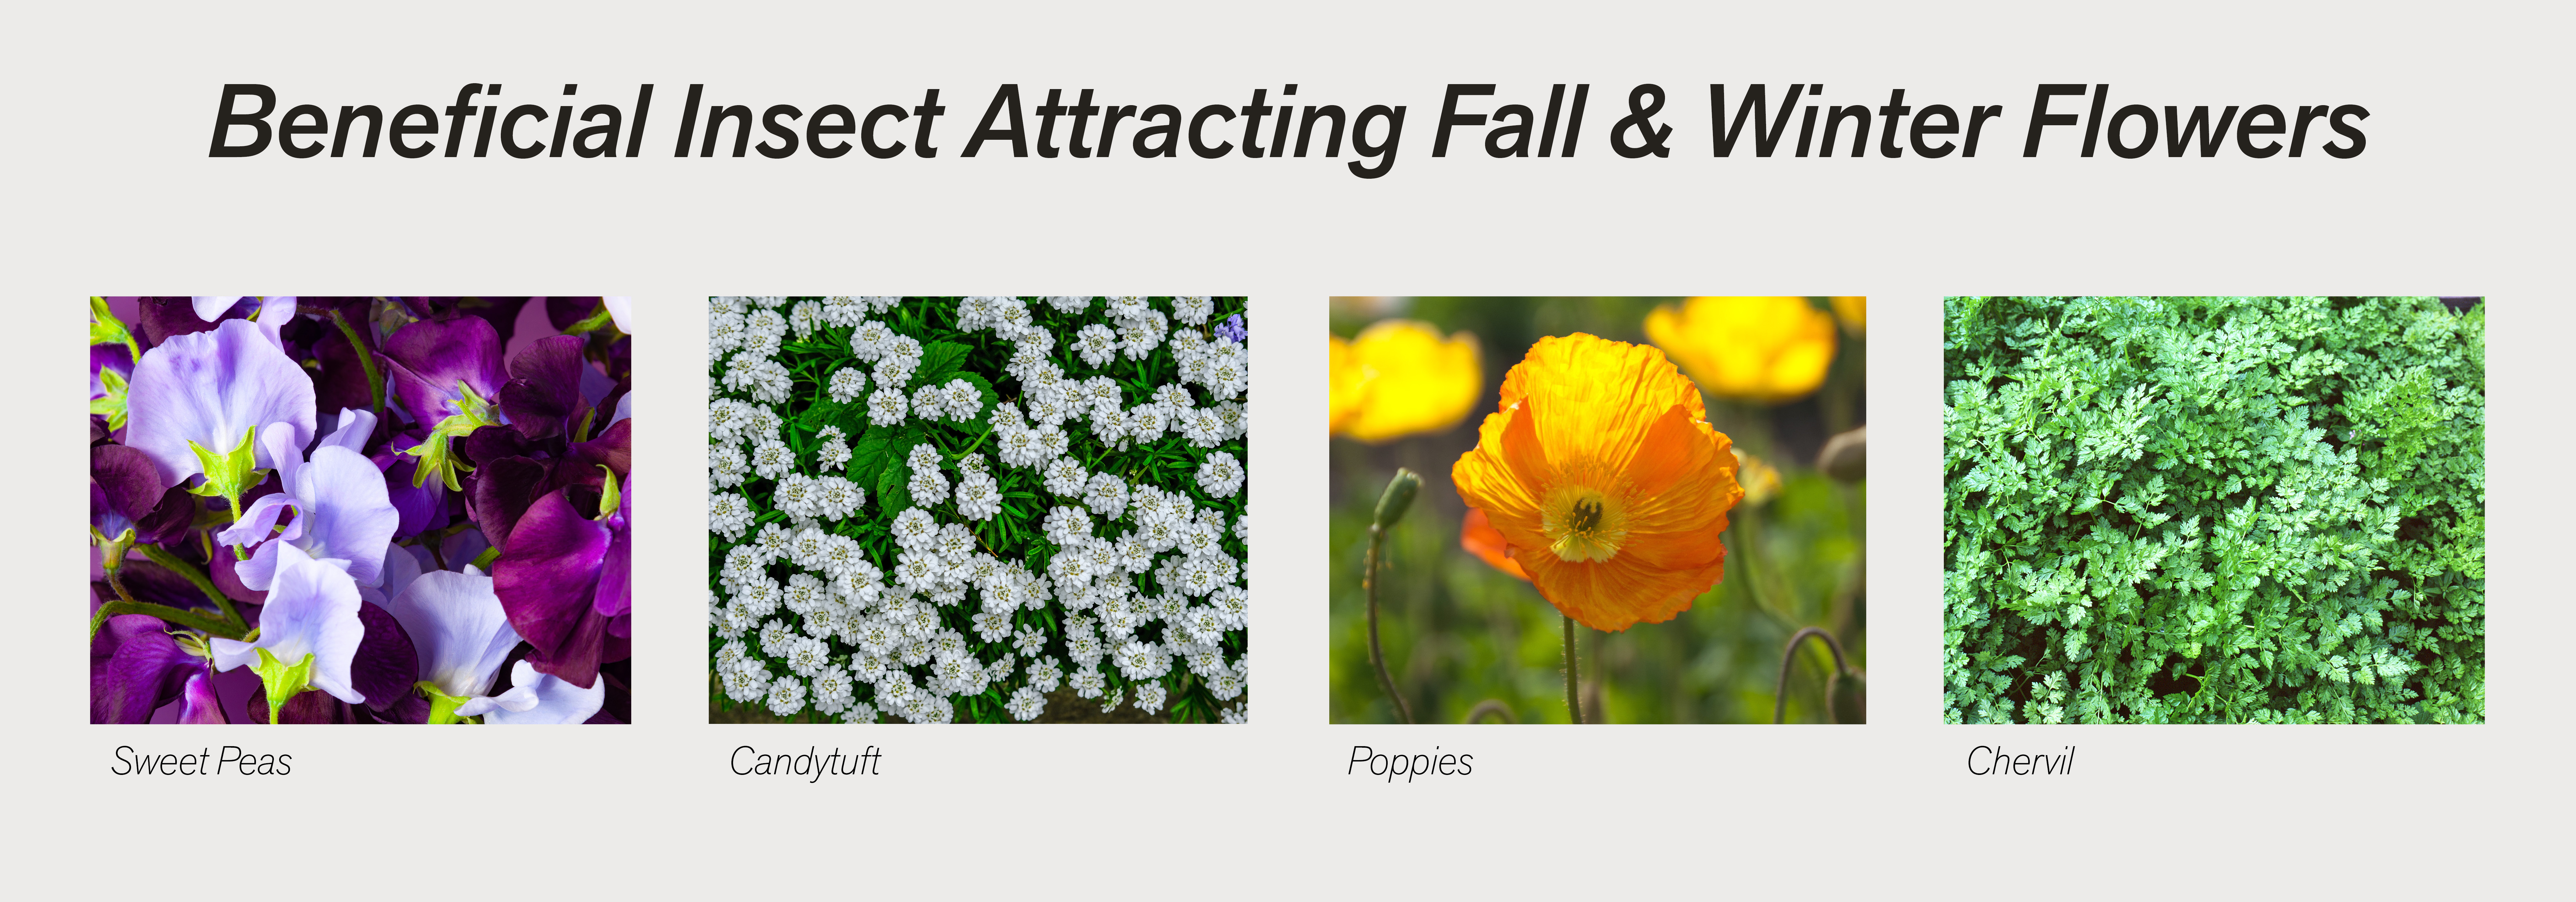 Beneficial Insect Attracting Fall & Winter Flowers 